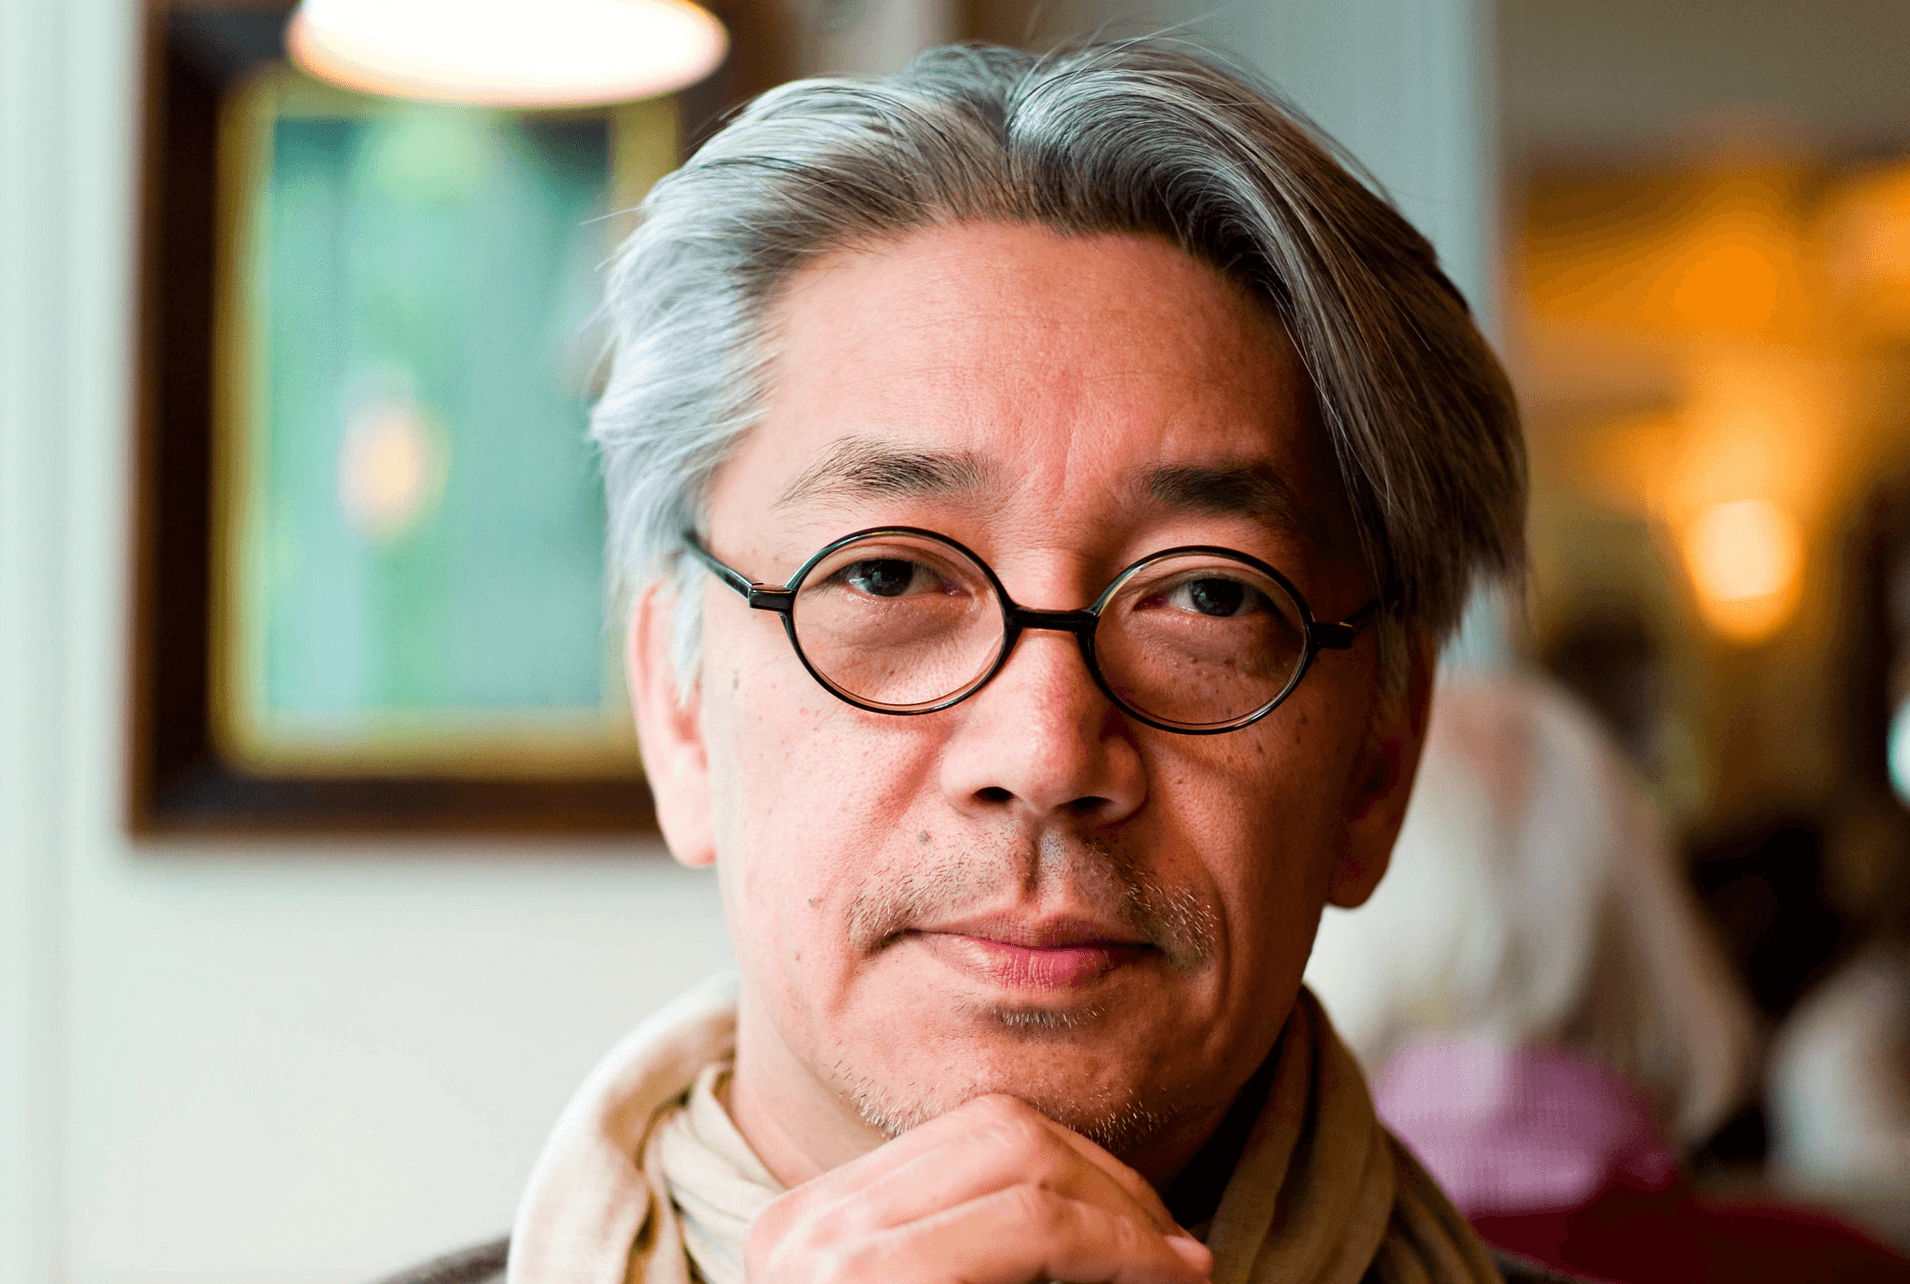 The final performance from Ryuichi Sakamoto to be premiered in new film, ‘Opus,’ next month